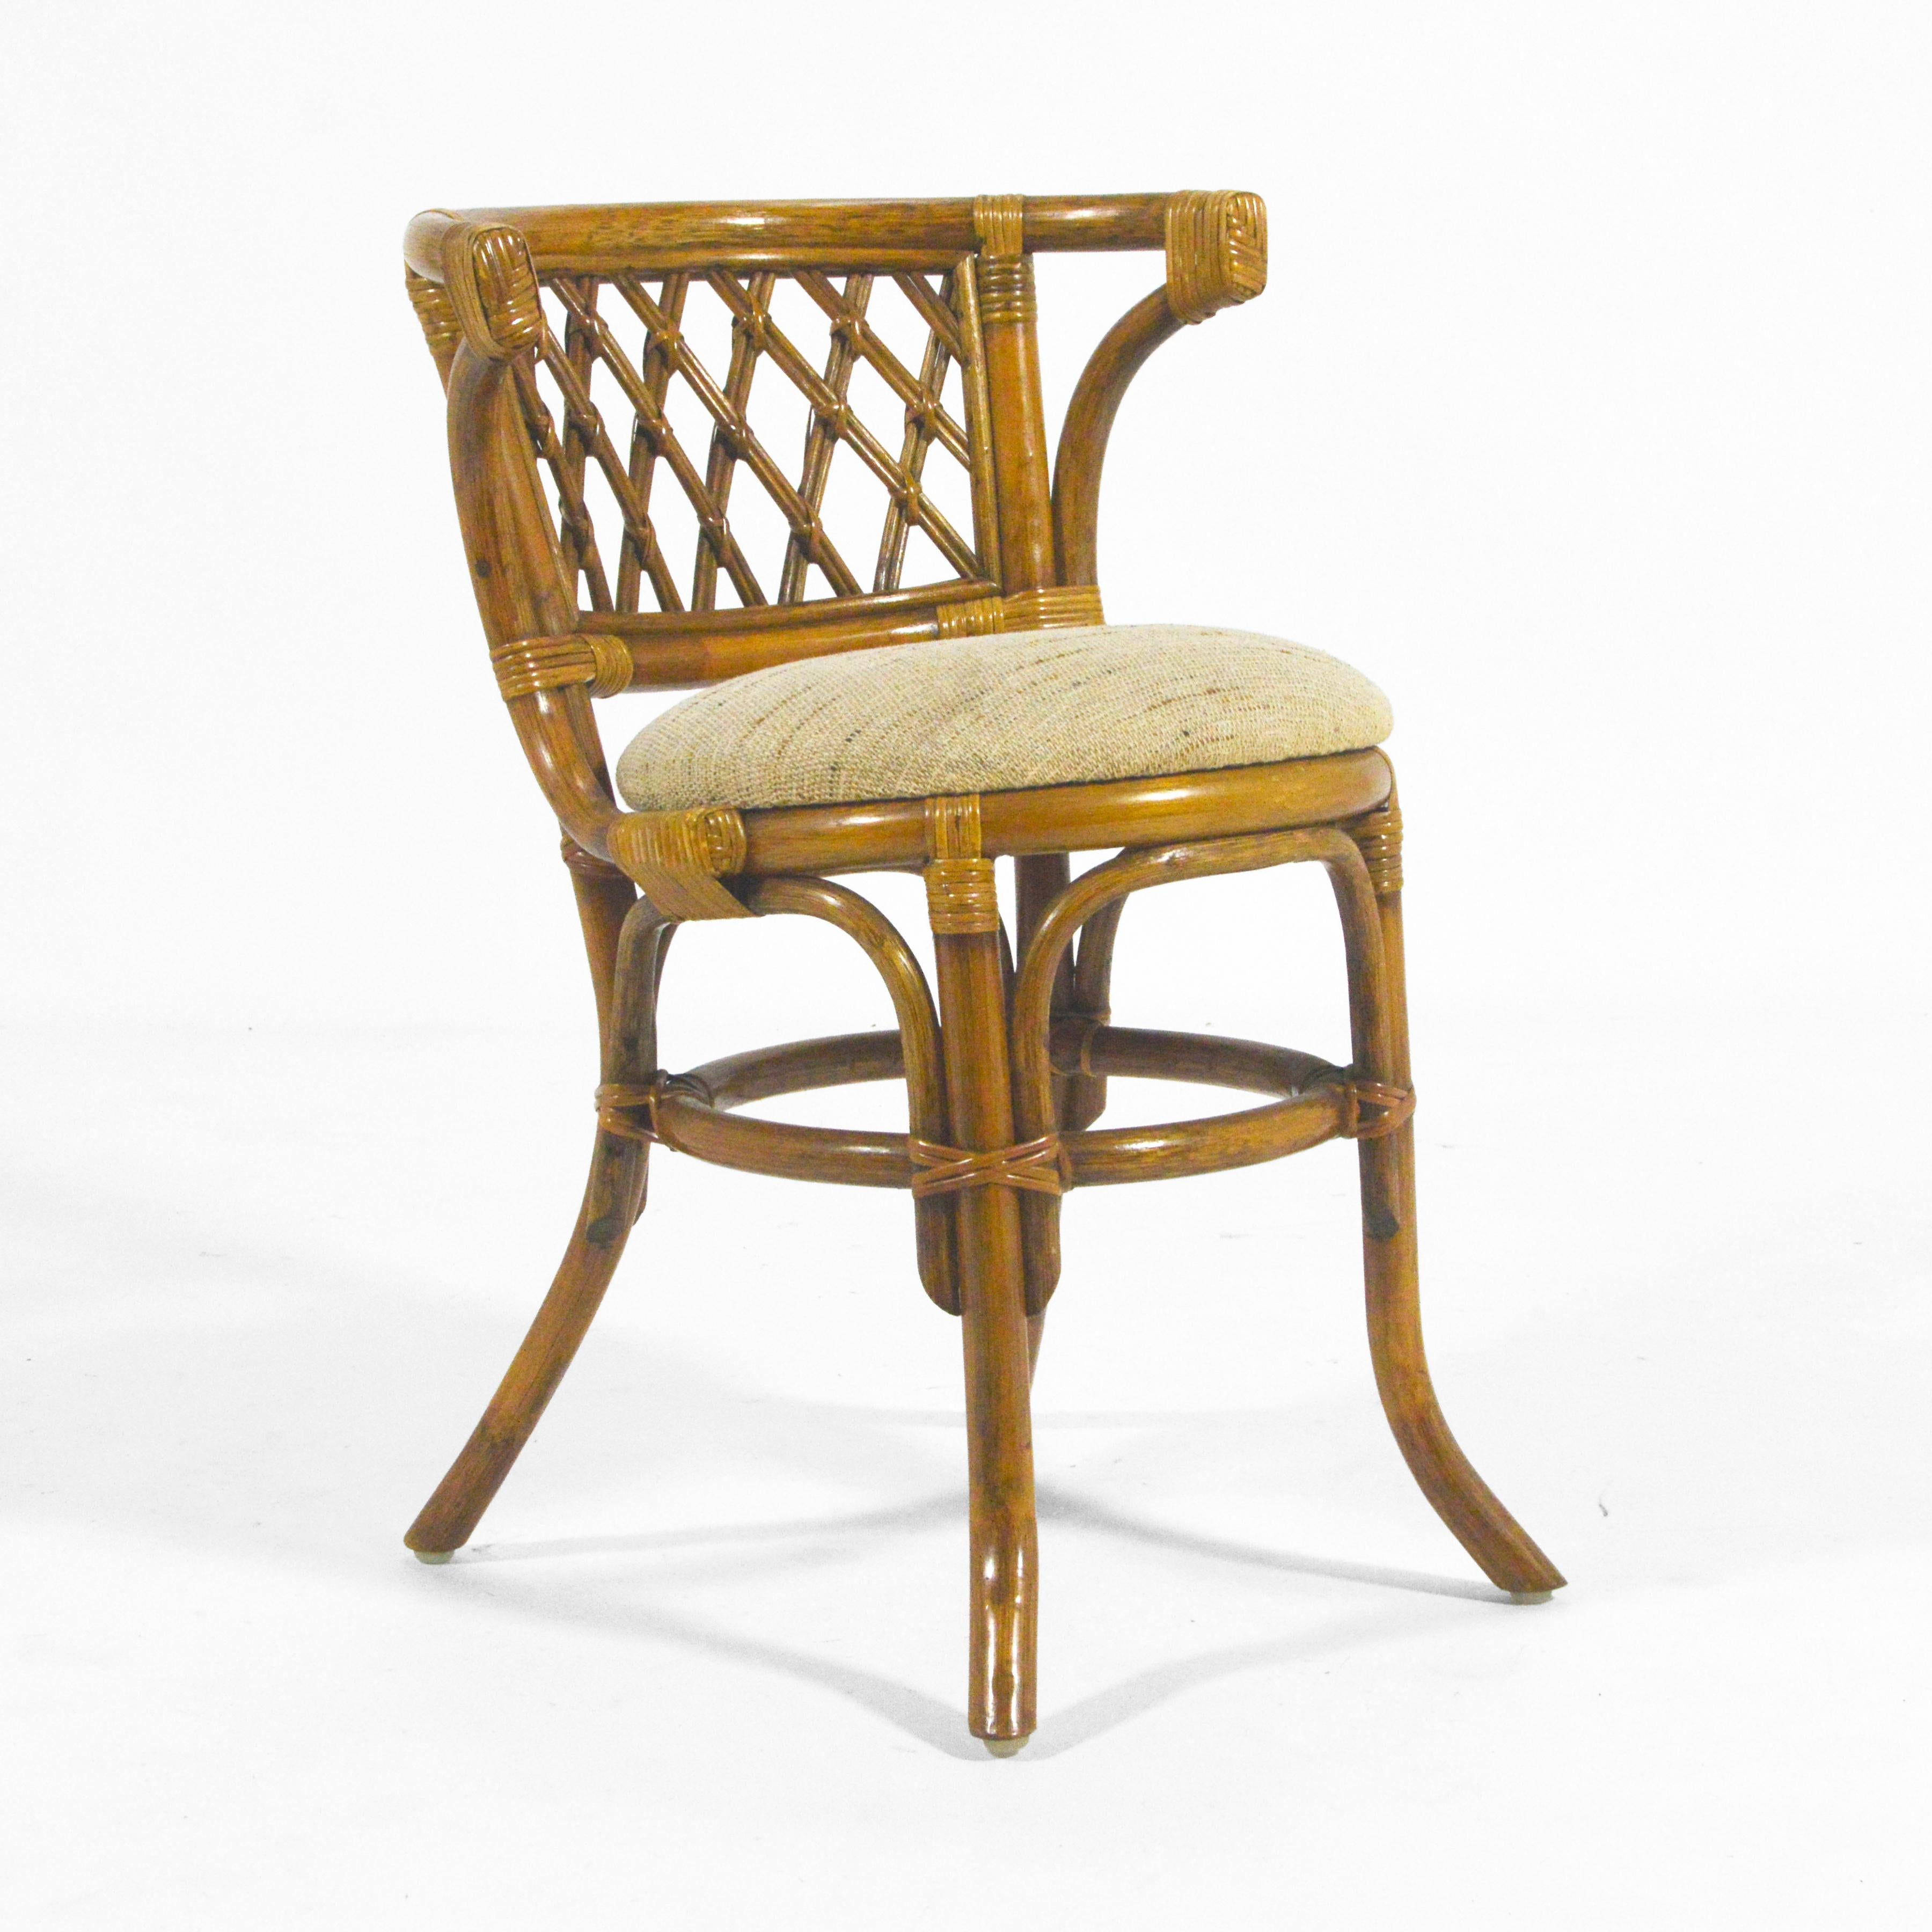 Rattan & Cane Game Table and Chair Set 3